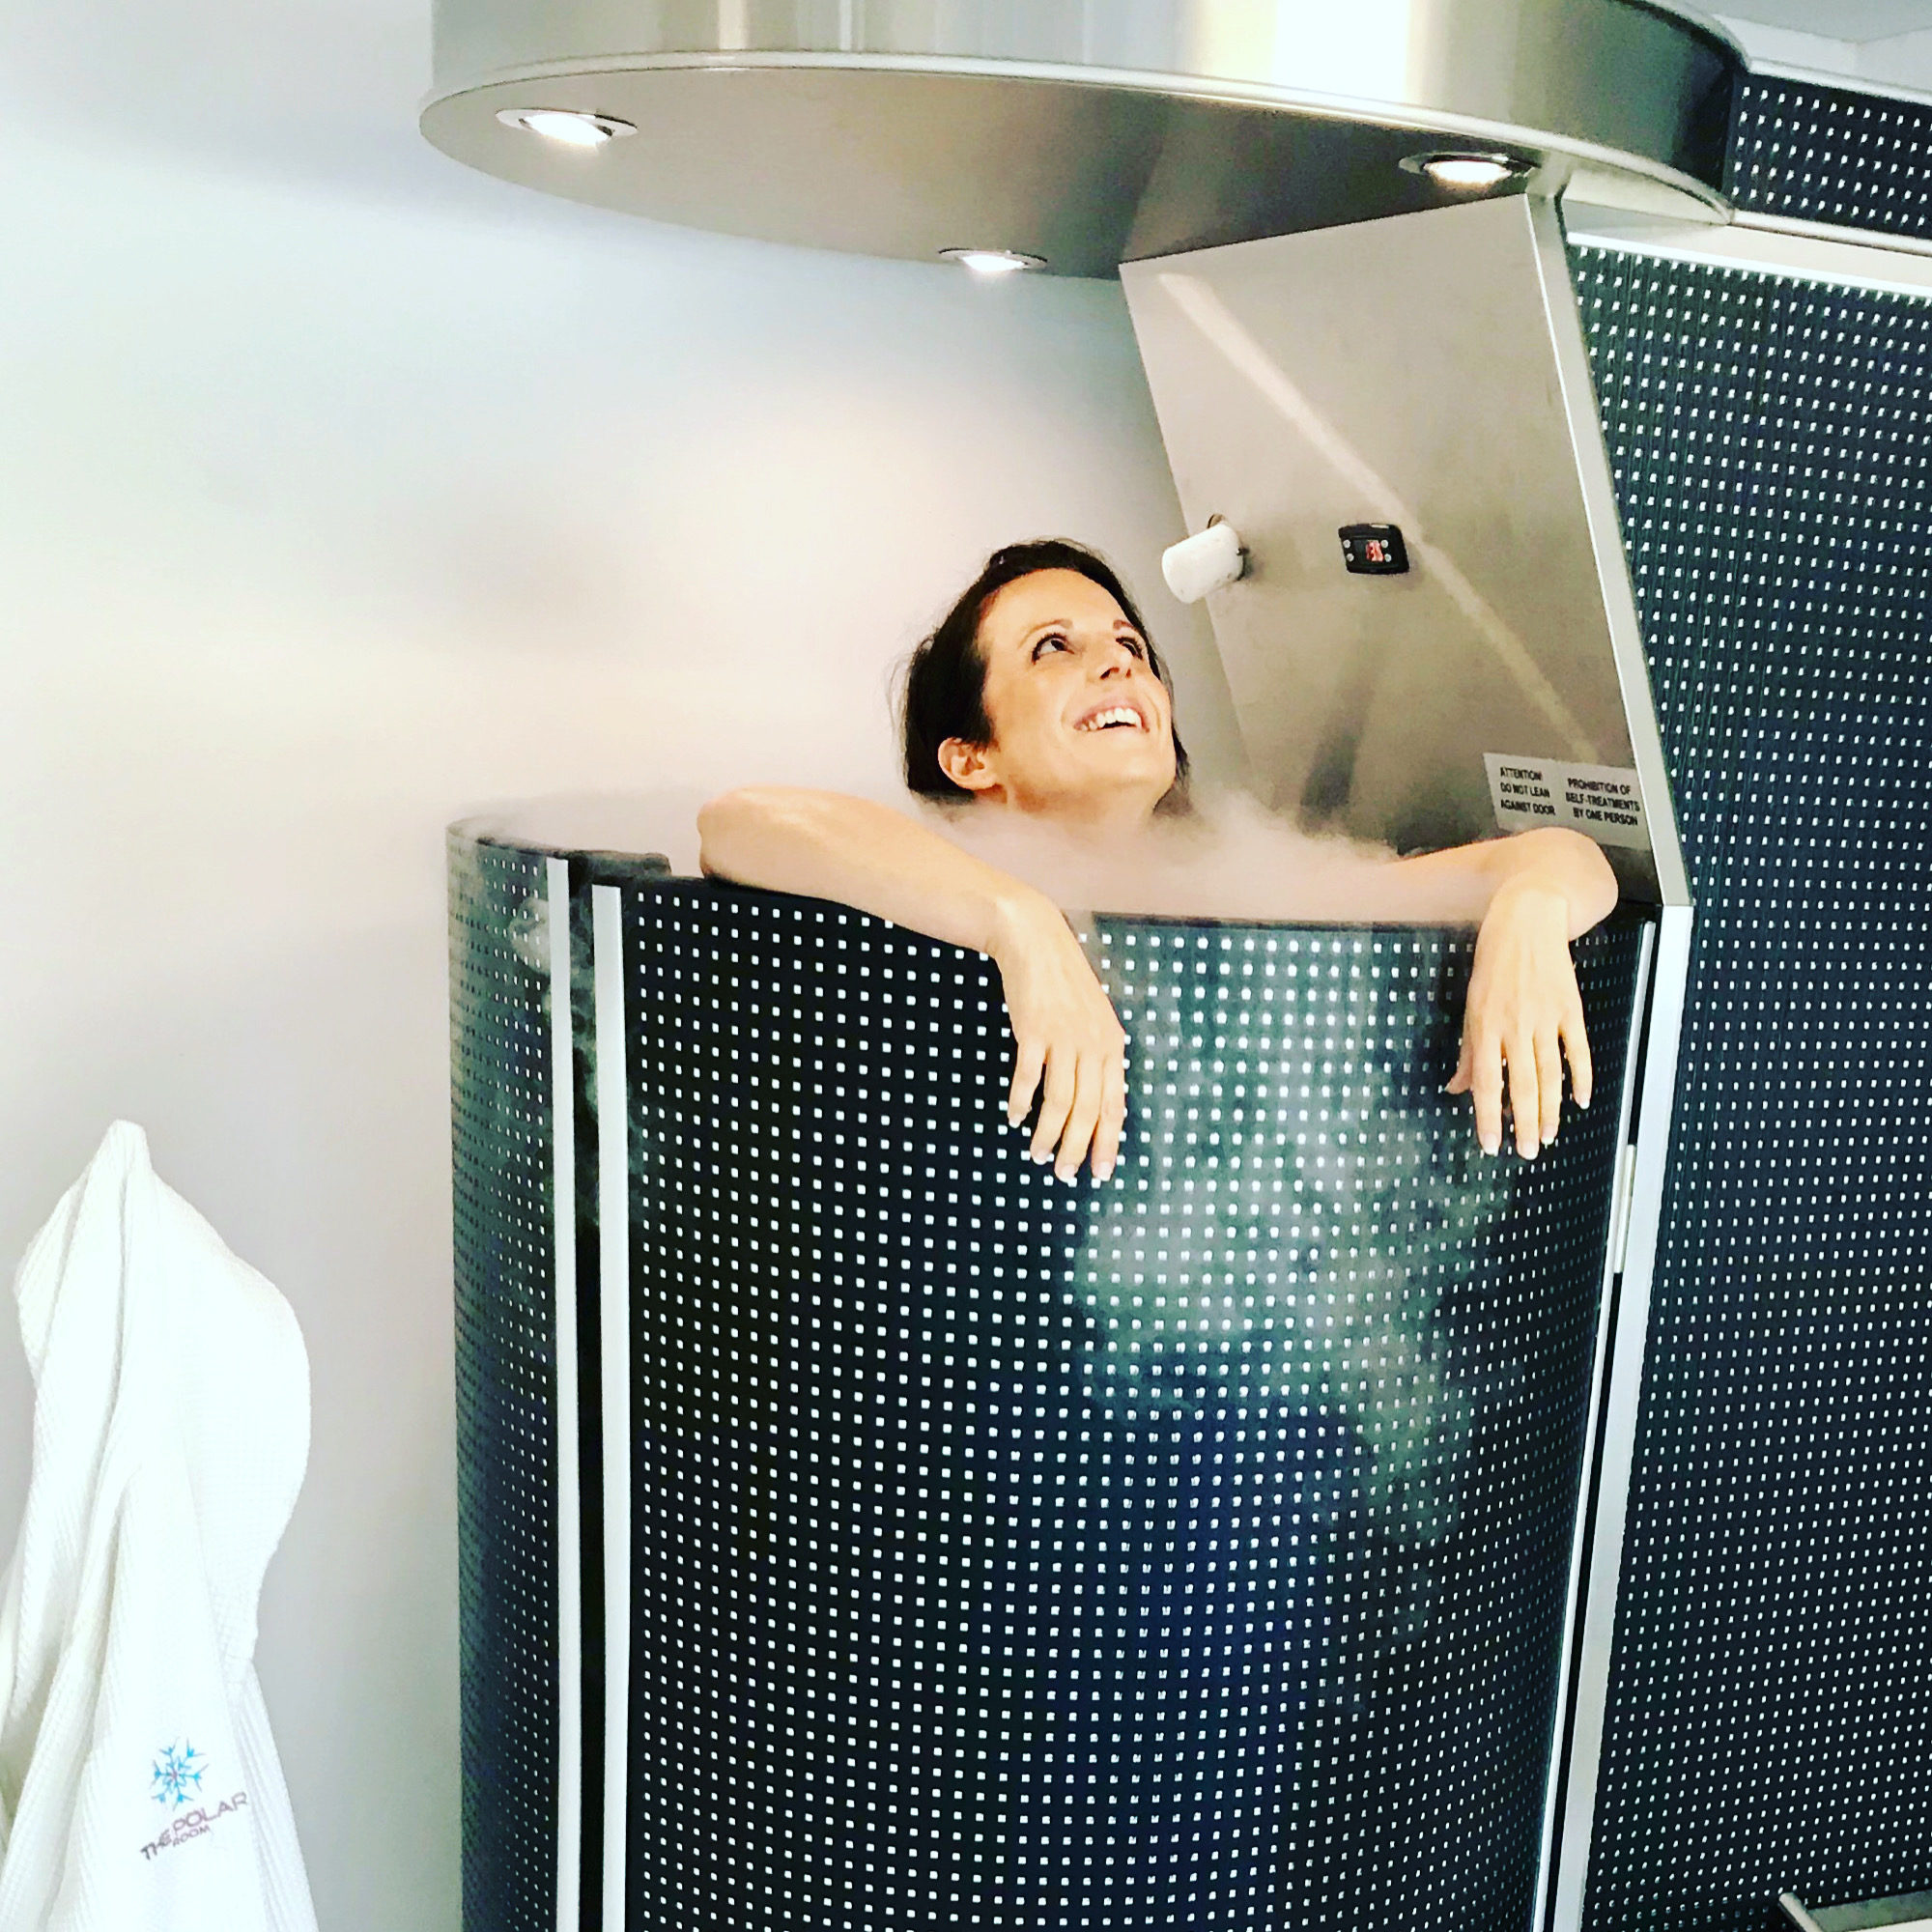 PERTH WELLNESS COACH HEALTH AND NUTRITION CRYOTHERAPY PERTH